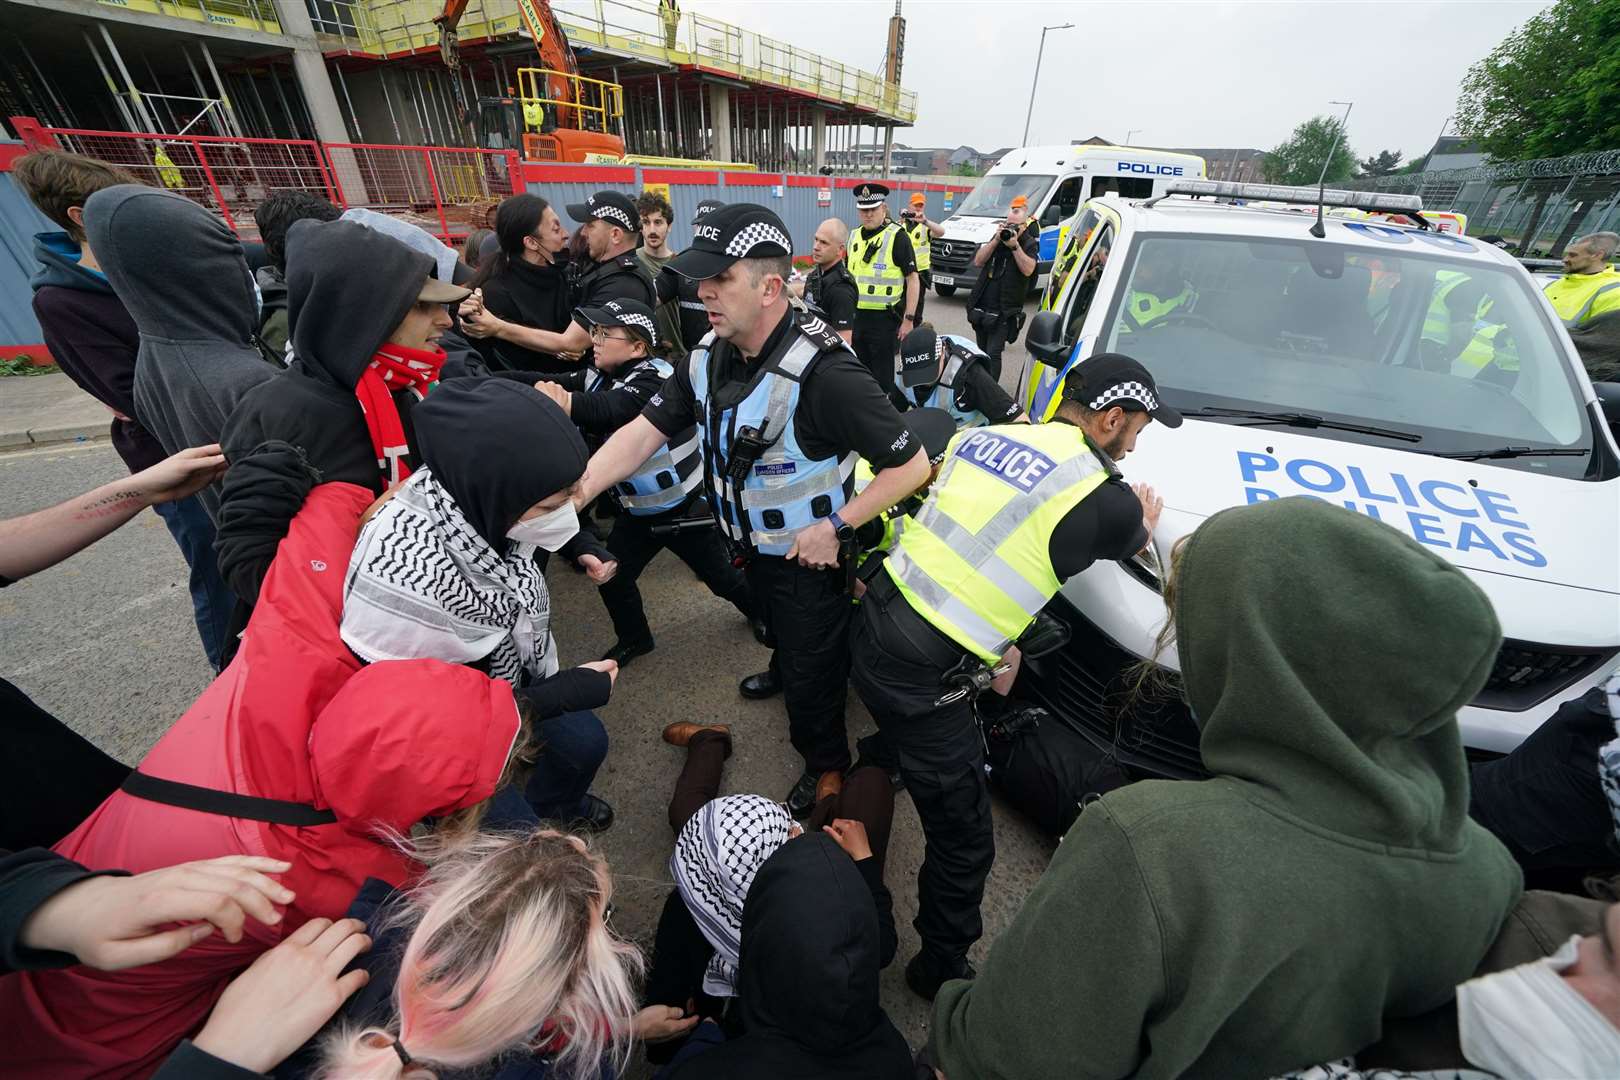 There were scuffles between the campaigners and police outside the factory (Andrew Milligan/PA)